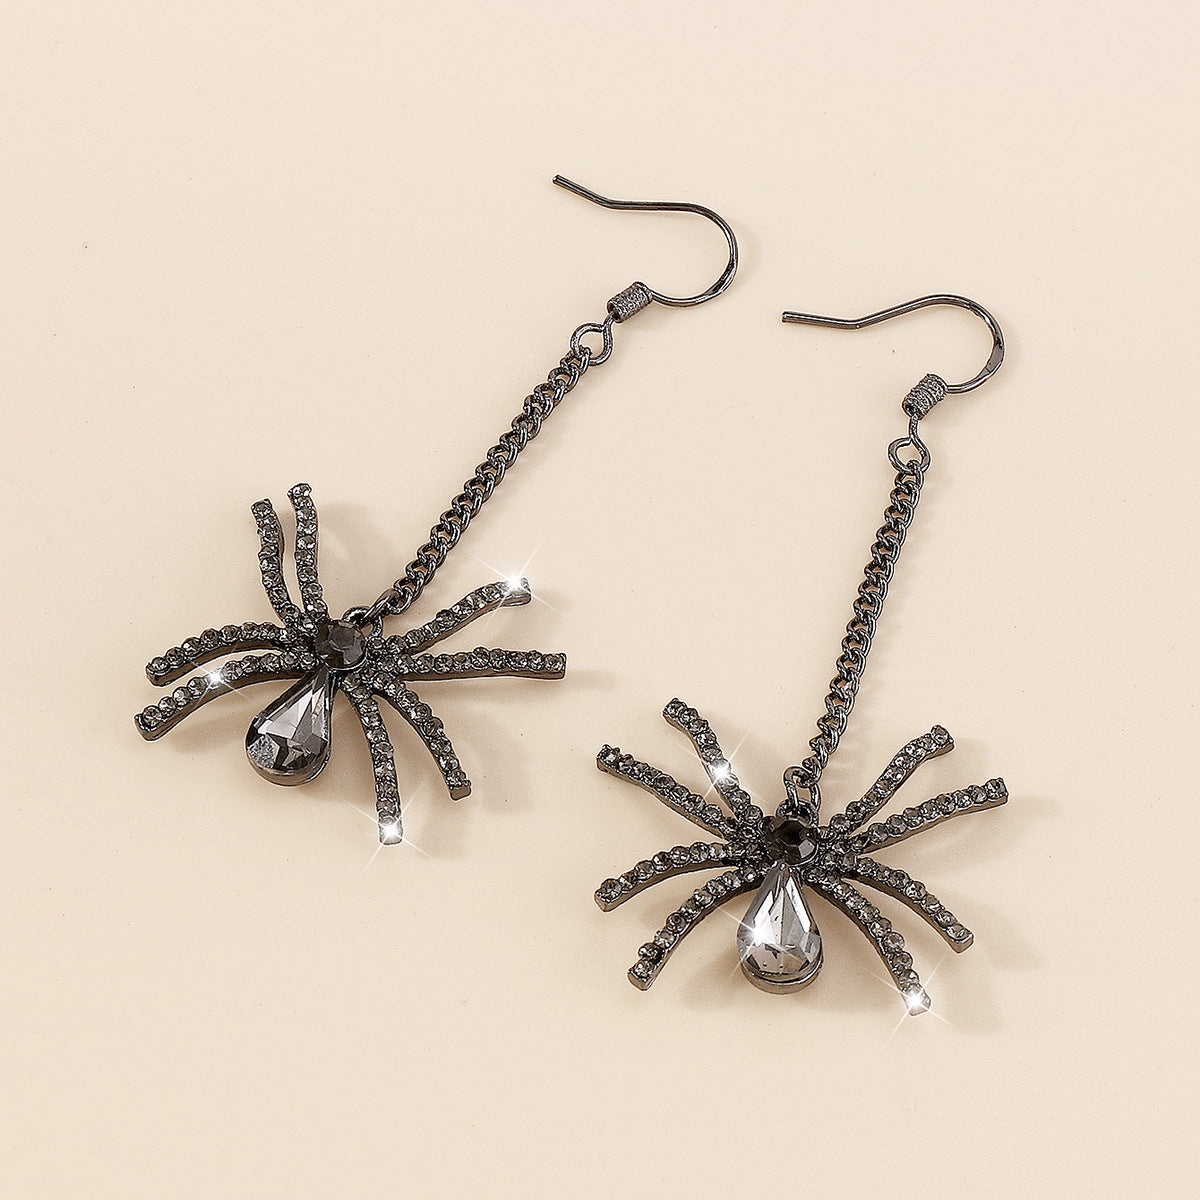 Dark style old retro long earrings exaggerated spider earrings